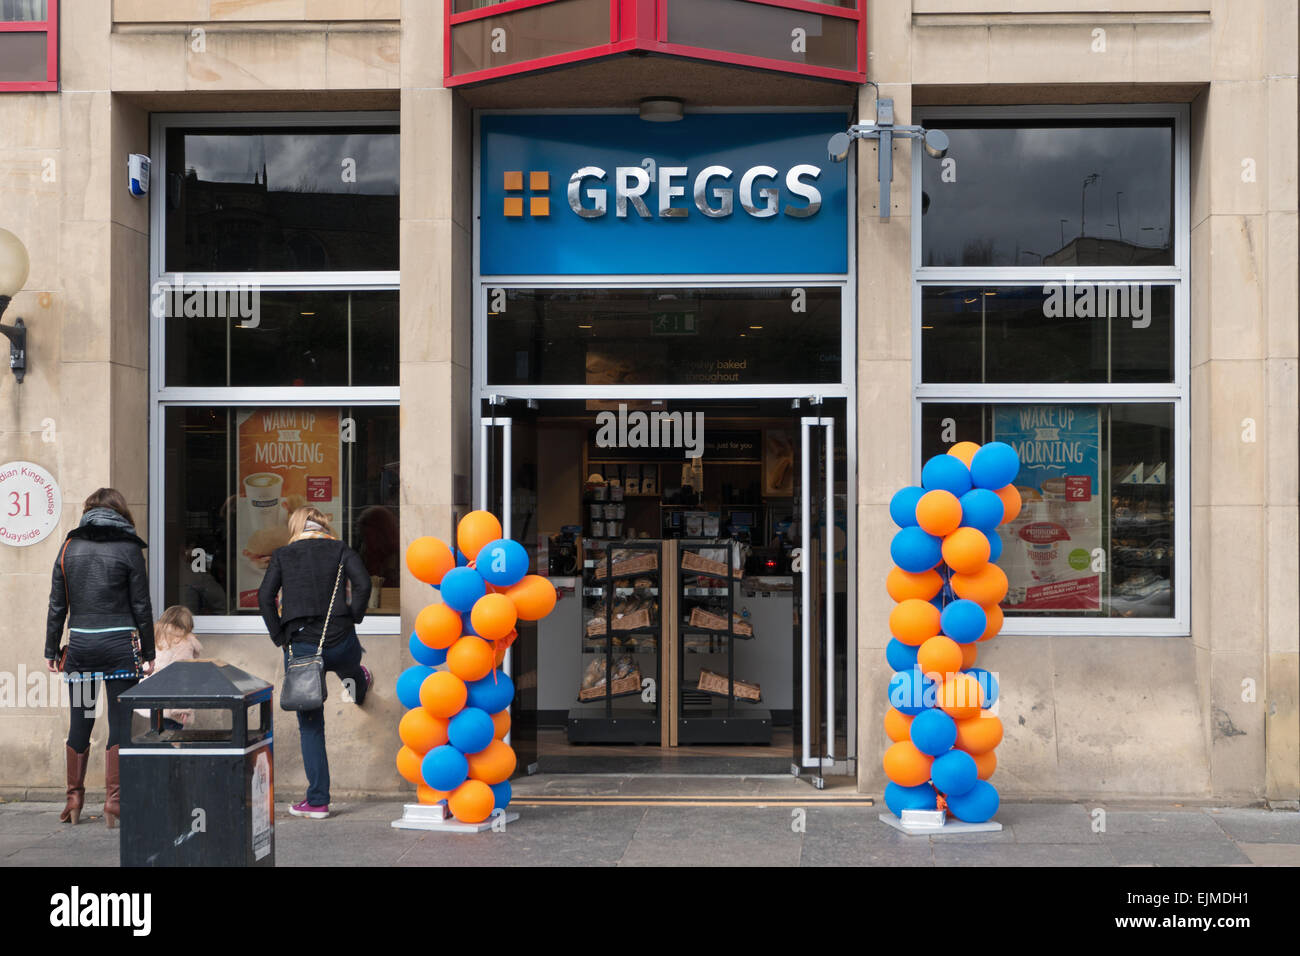 Greggs the bakers café and shop on Newcastle upon Tyne quayside, England, UK Stock Photo